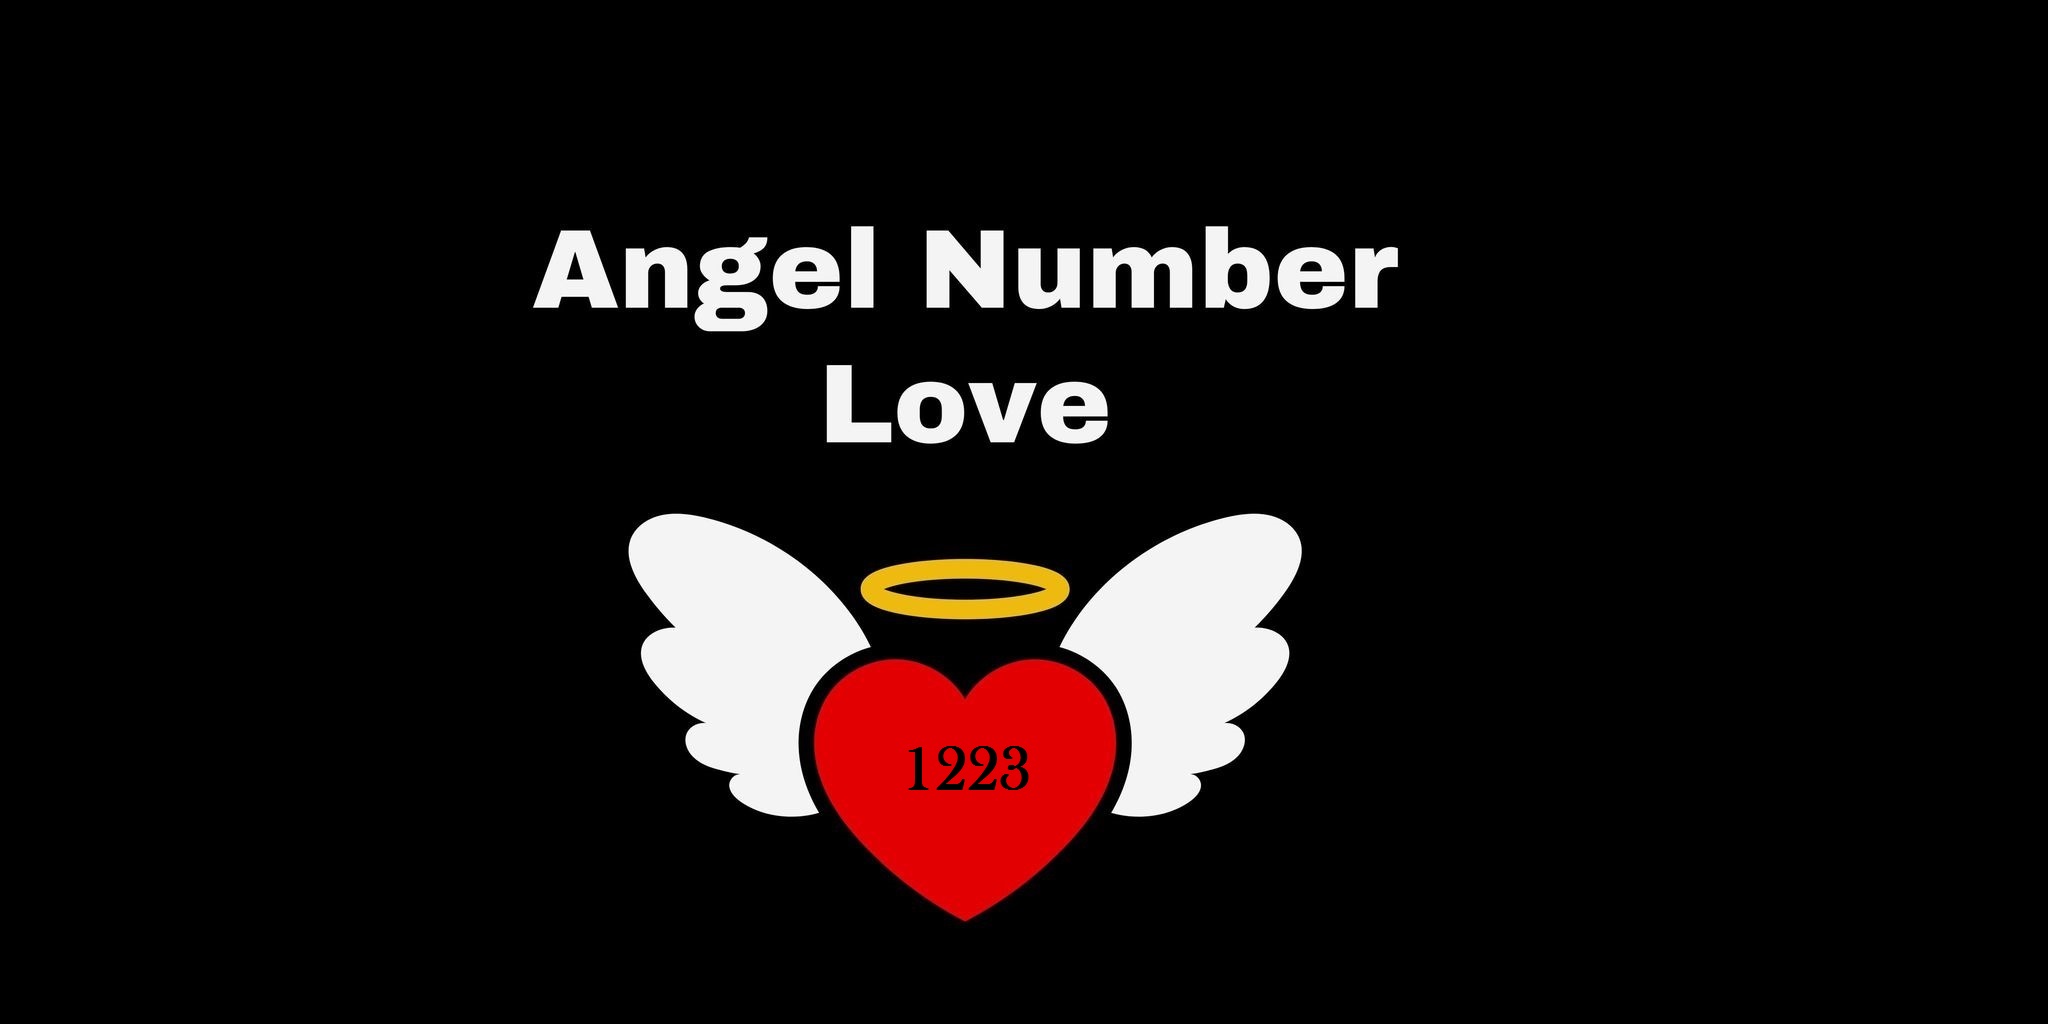 1223 Angel Number Meaning In Love